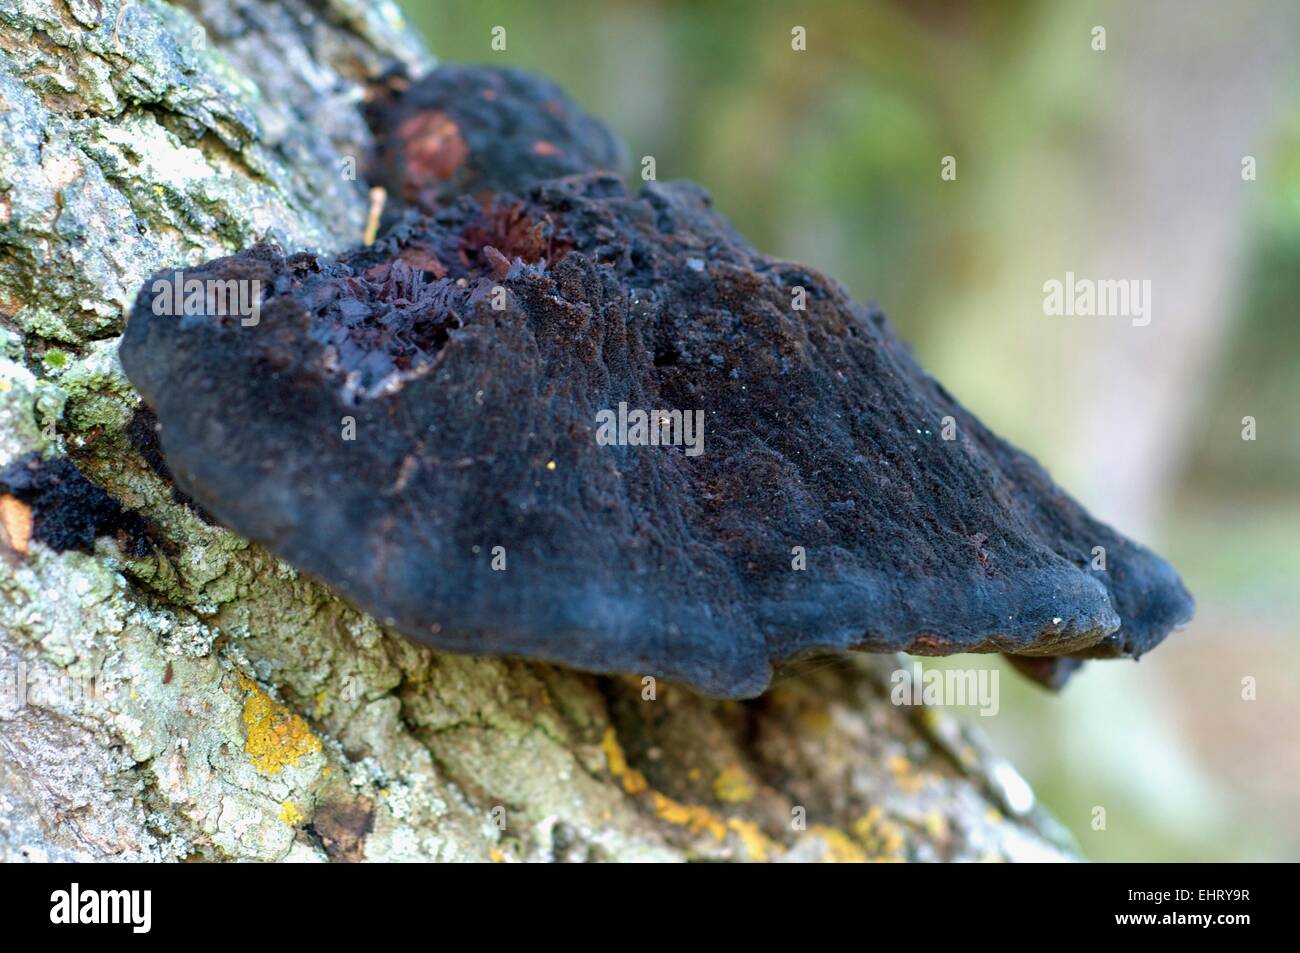 Close up of black fungus on a tree trunk with lichen on the bark Stock Photo